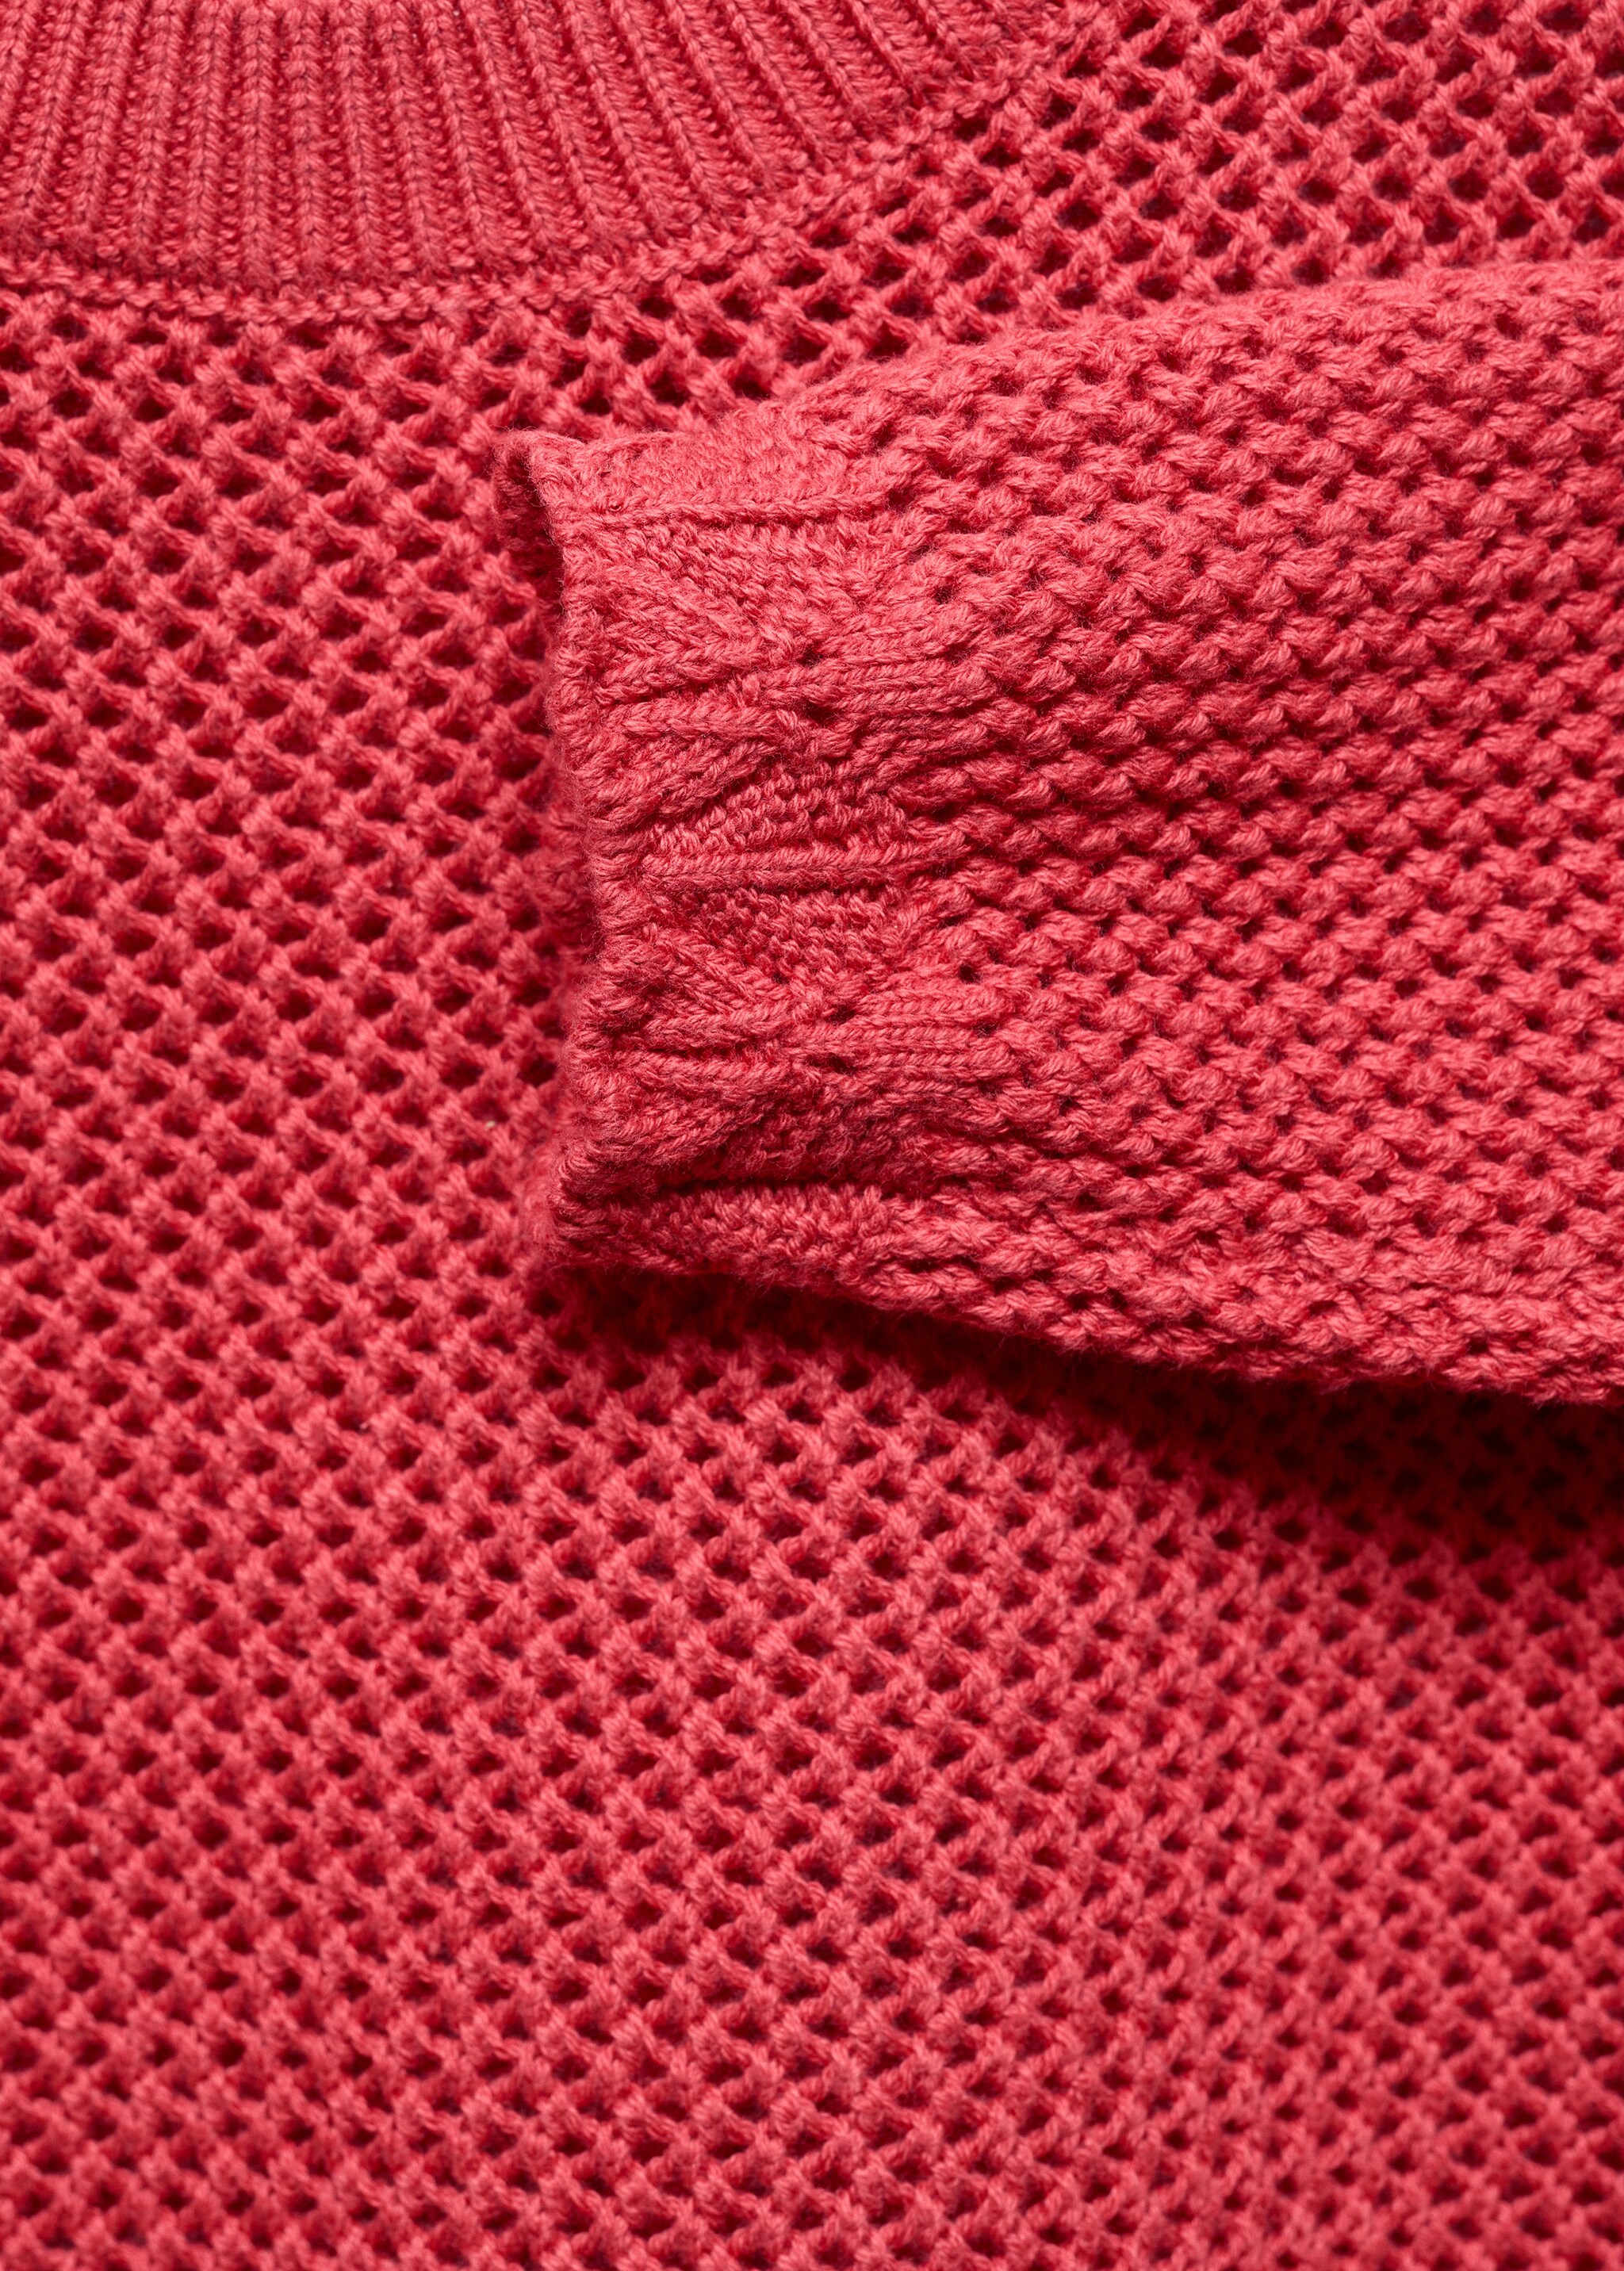 Openwork knit sweater - Details of the article 8